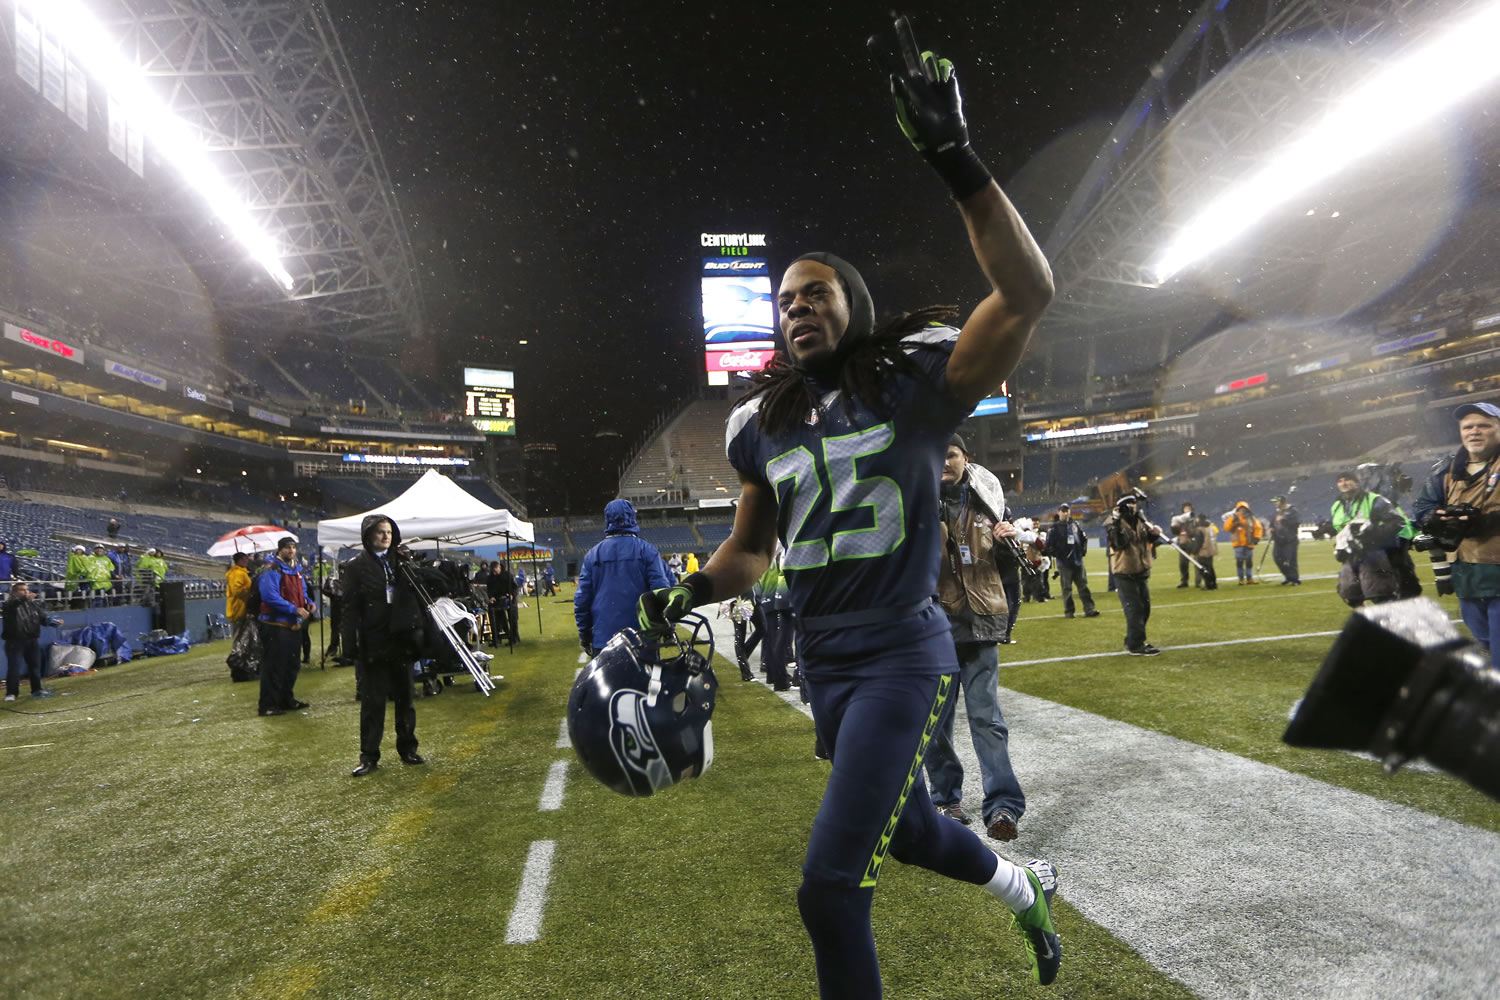 Seattle Seahawks Richard Sherman runs off the field after the Seahawks beat the San Francisco 49ers 42-13 in an NFL football game, Sunday, Dec. 23, 2012, in Seattle.